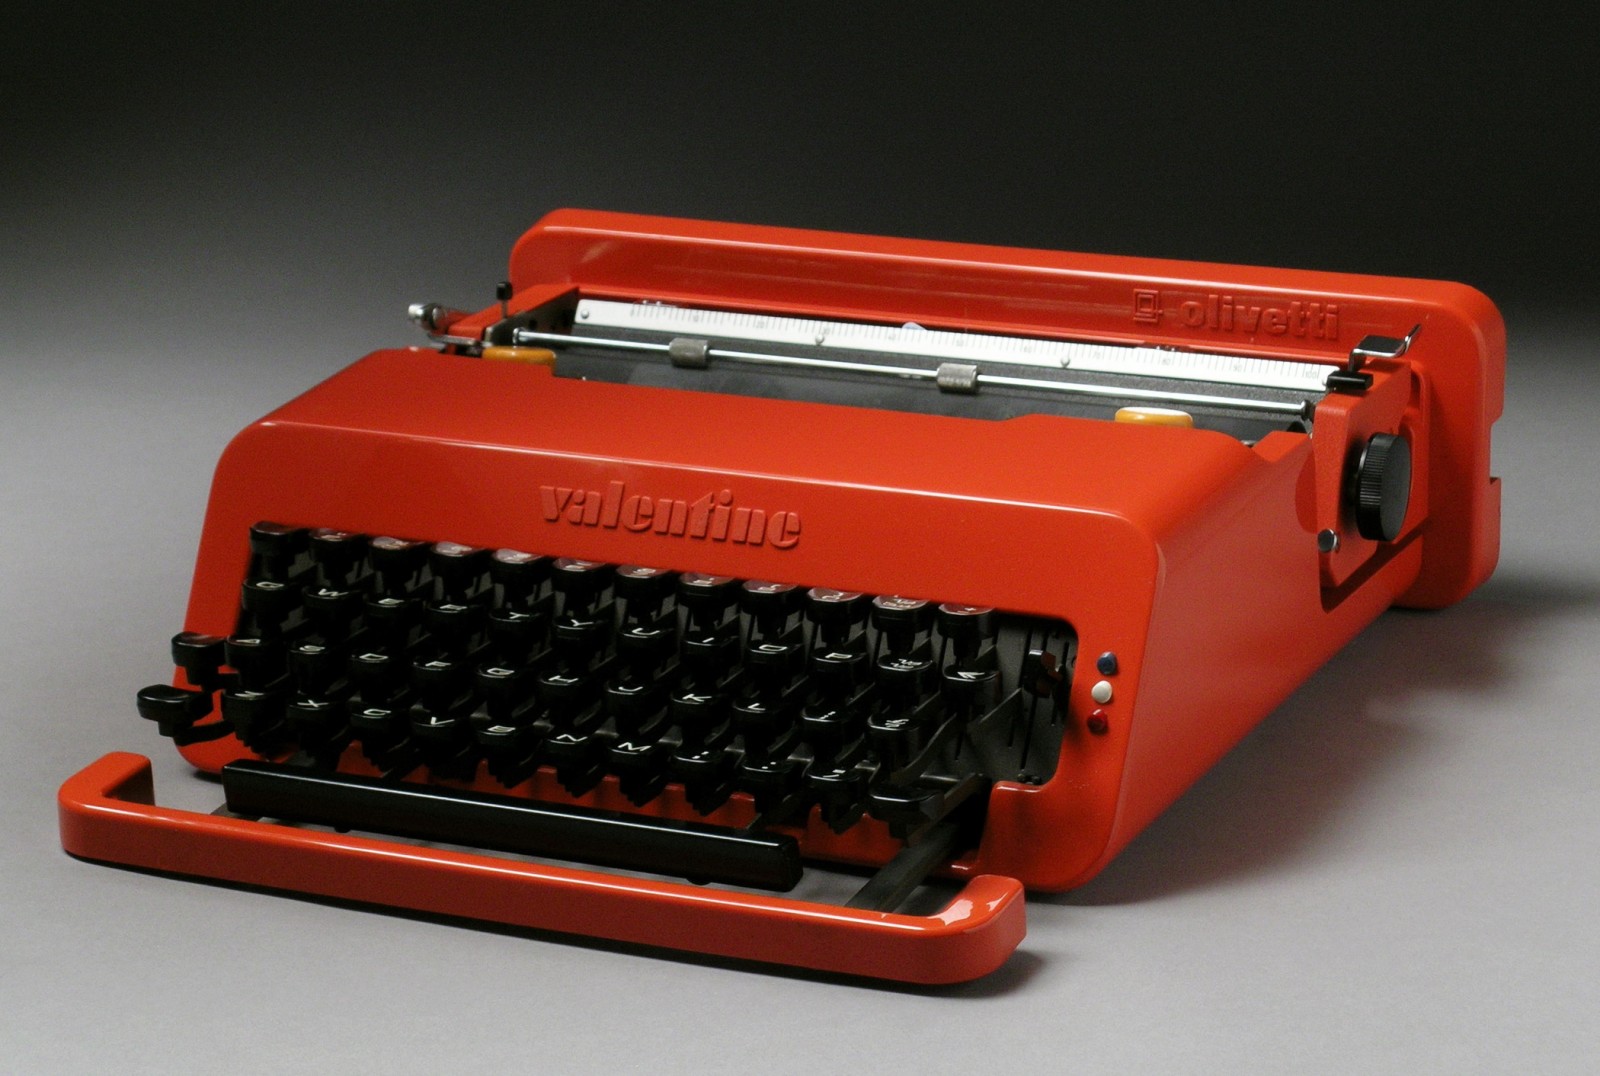 Ettore Sottsass, in collaboration with Perry A King, Valentine portable typewriter